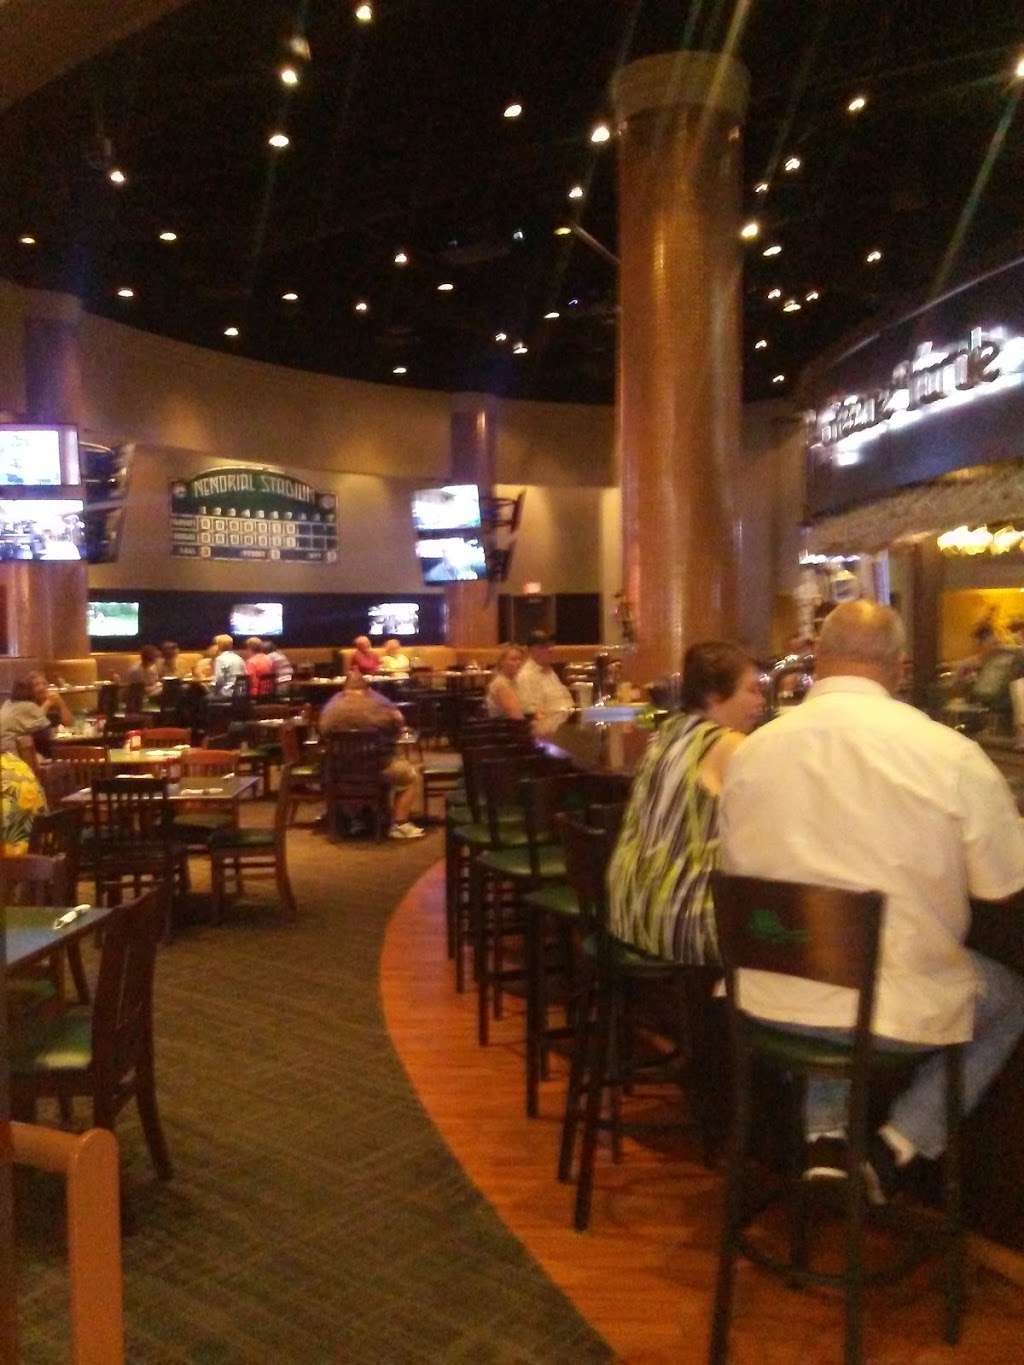 The Greene Turtle Sports Bar & Grille | 1201 Chesapeake Overlook Pkwy, Perryville, MD 21903, USA | Phone: (410) 378-1110